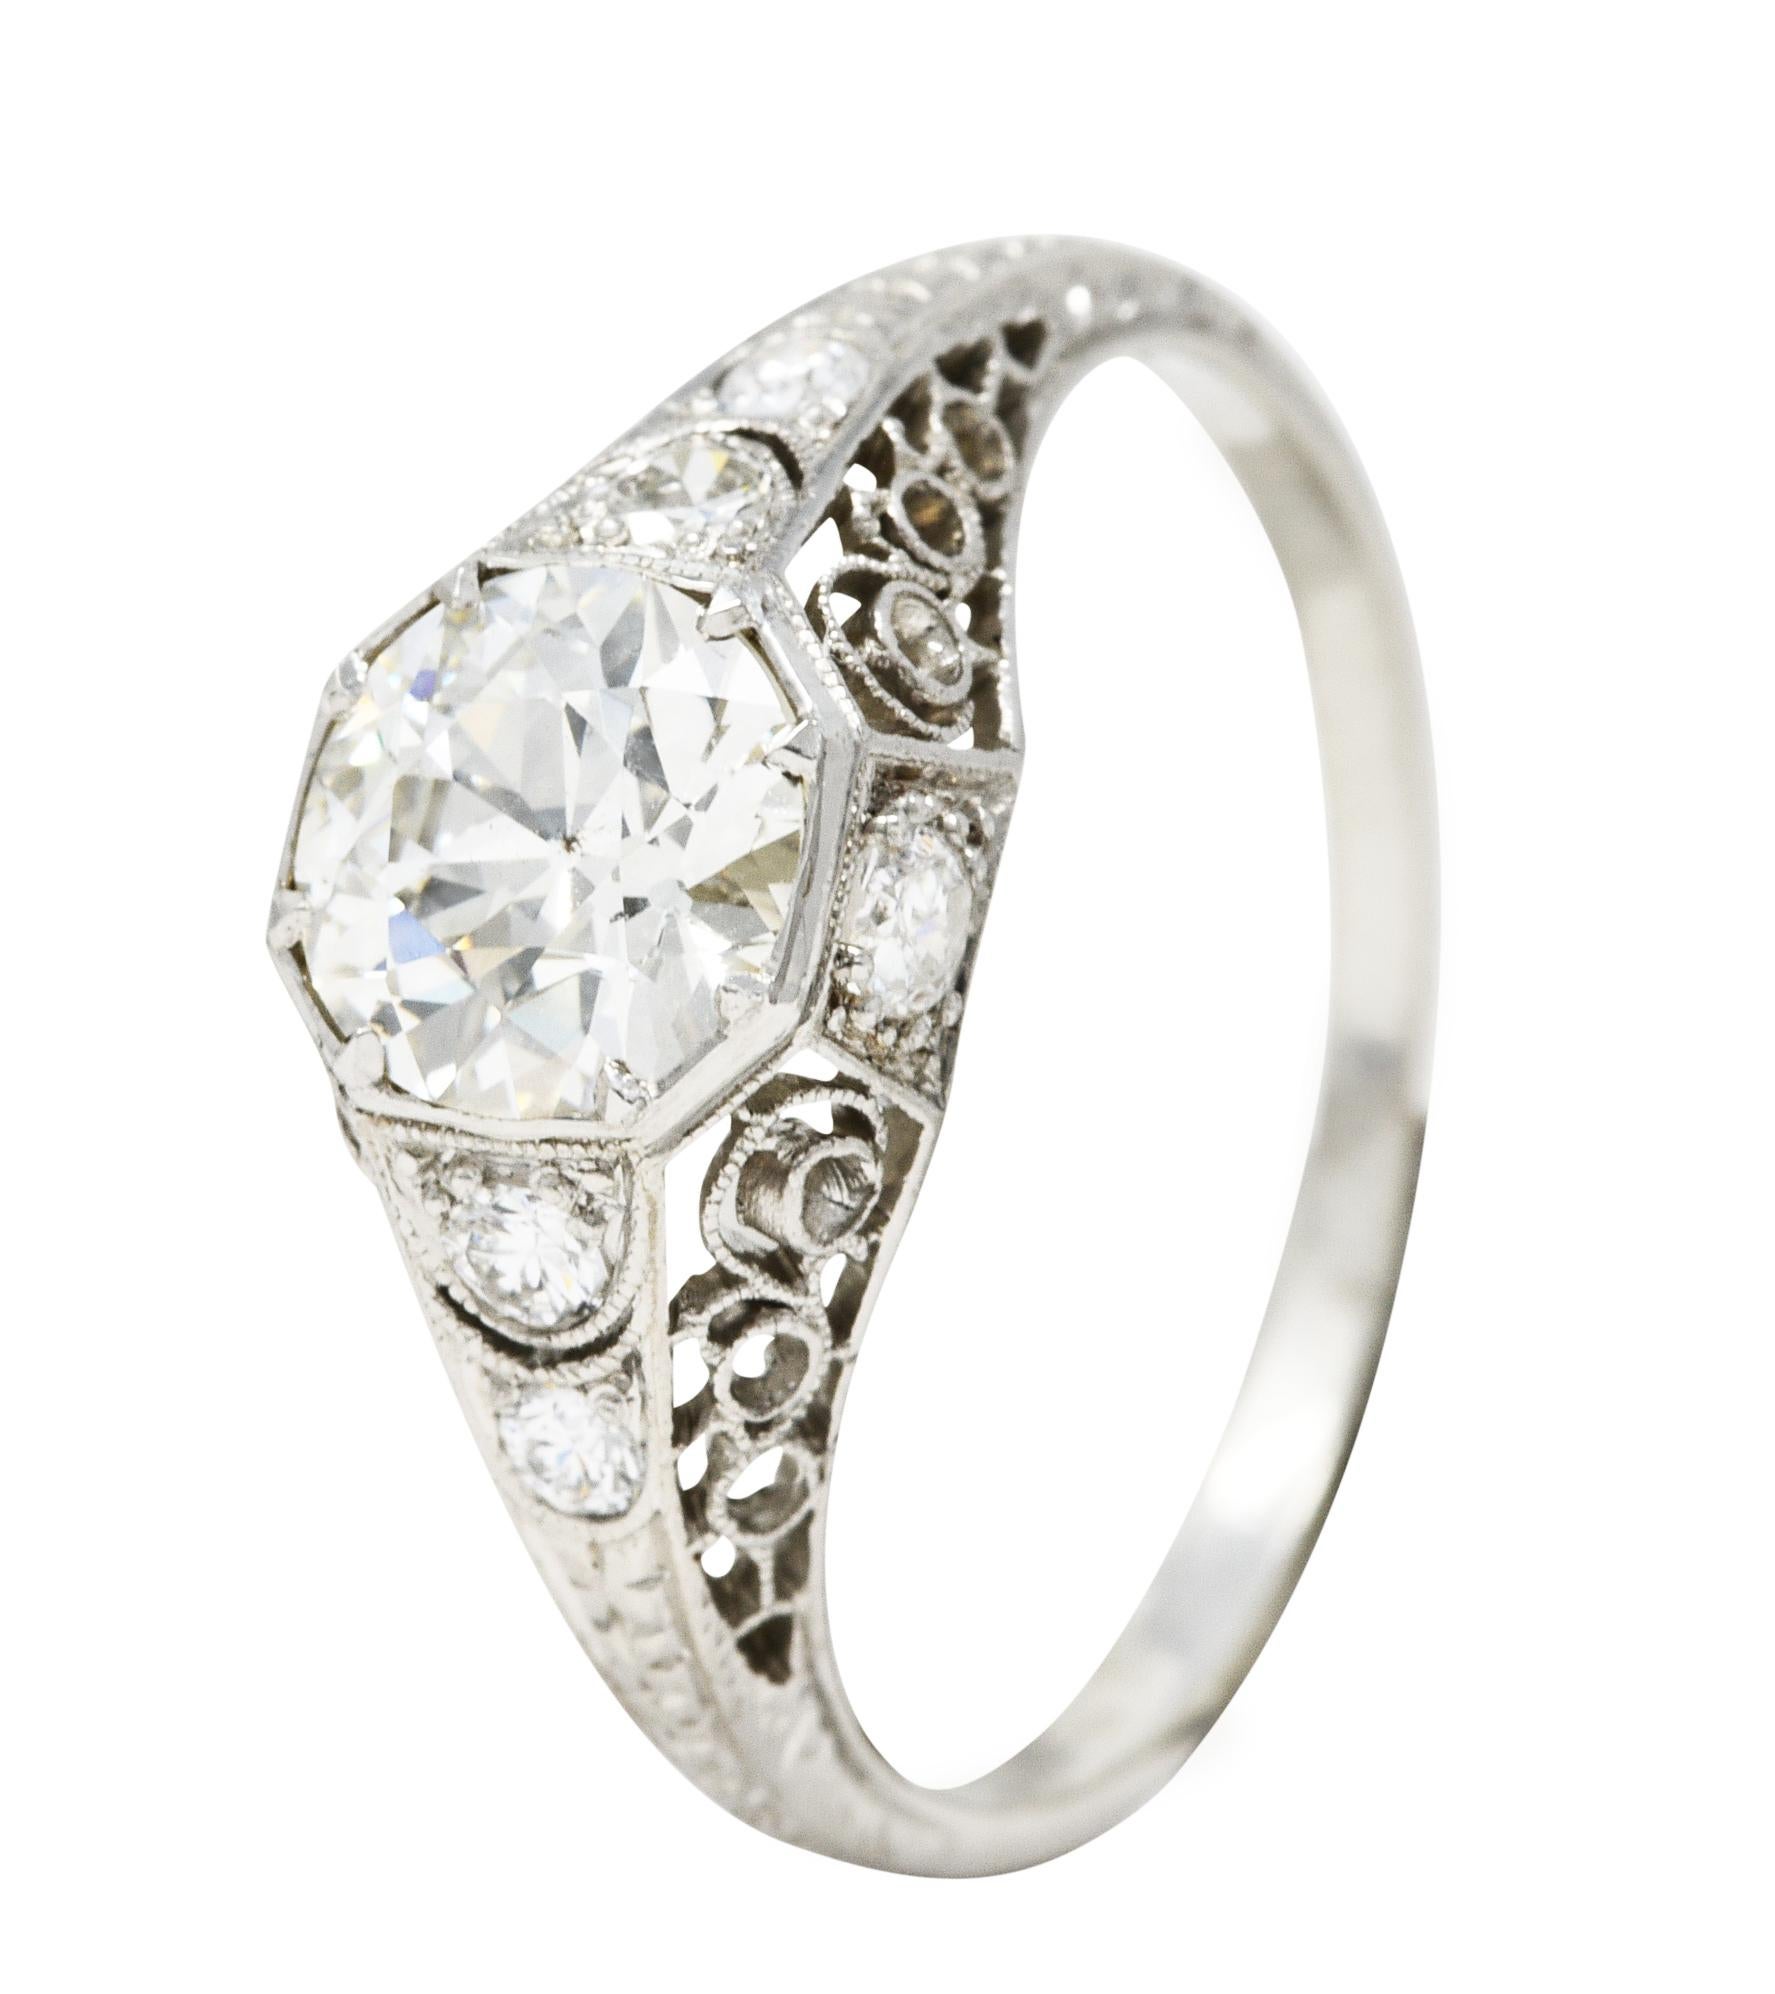 Early Art Deco 1.92 Carats Diamond Platinum Scrolled Filigree Engagement Ring For Sale 2